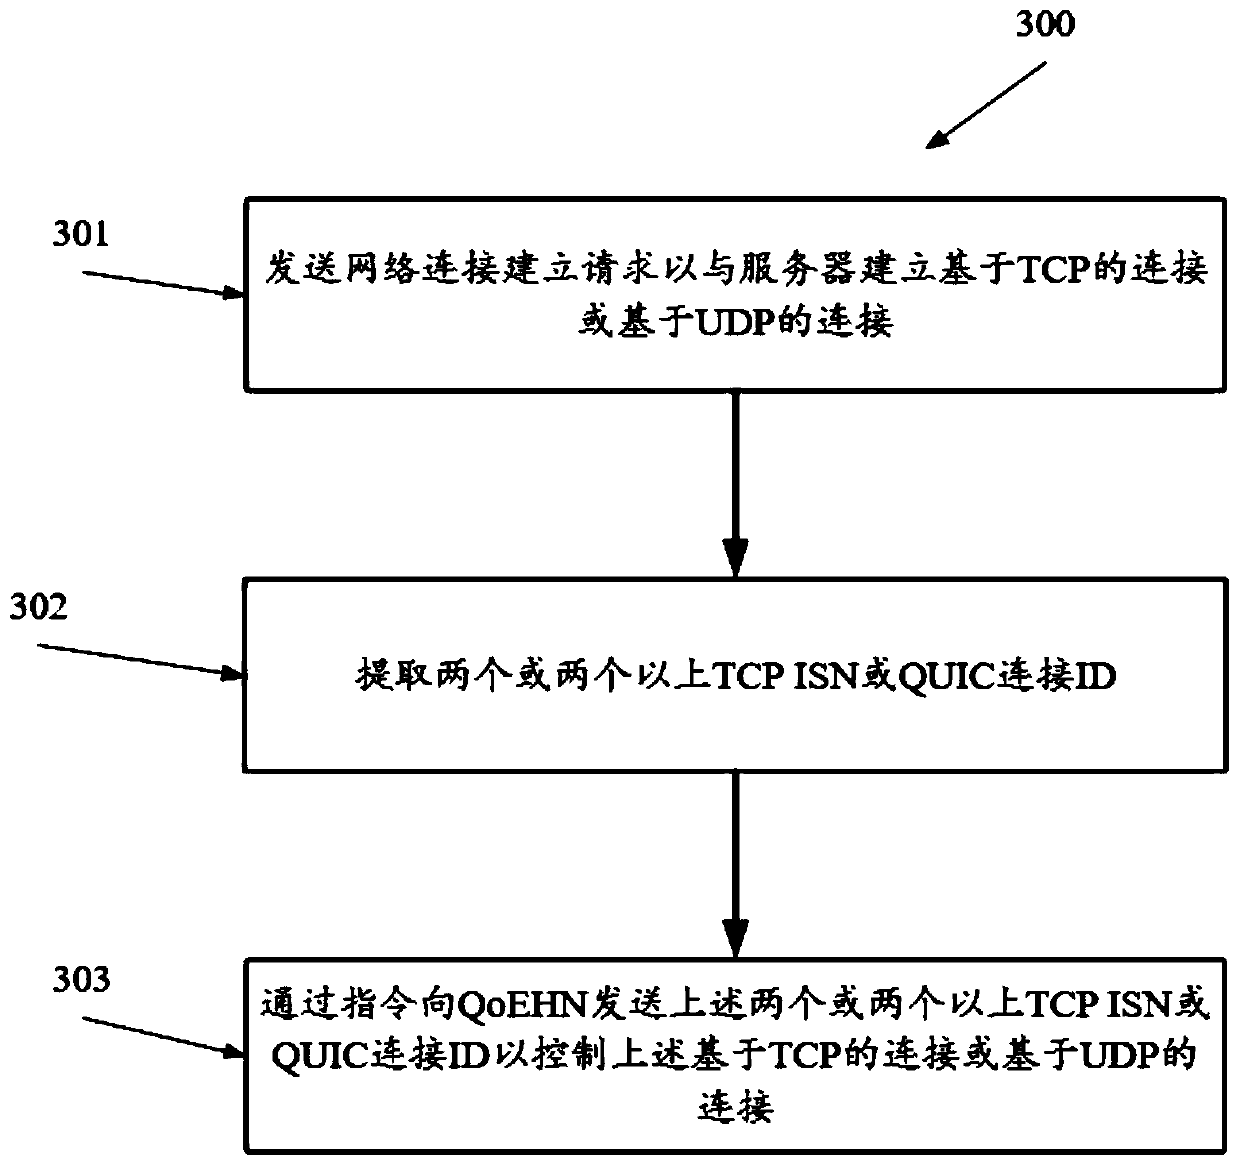 Method of improving qoe for video and web services using cross-layer information